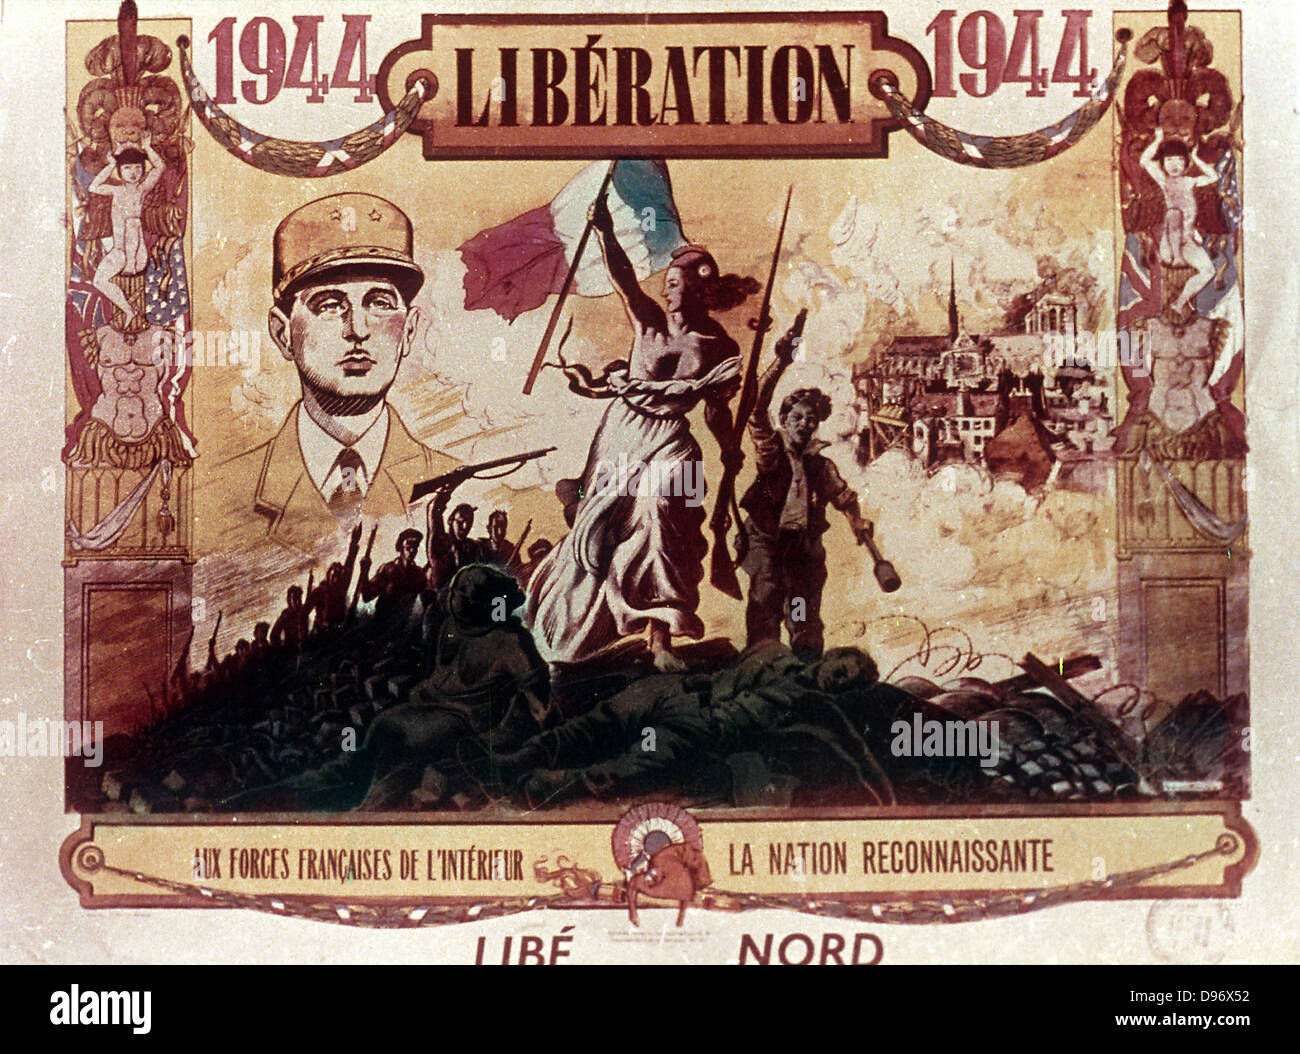 CHARLES DE GAULLE (1890 - 1970) French soldier, general and statesman,  depicted as President du Comite National Stock Photo - Alamy